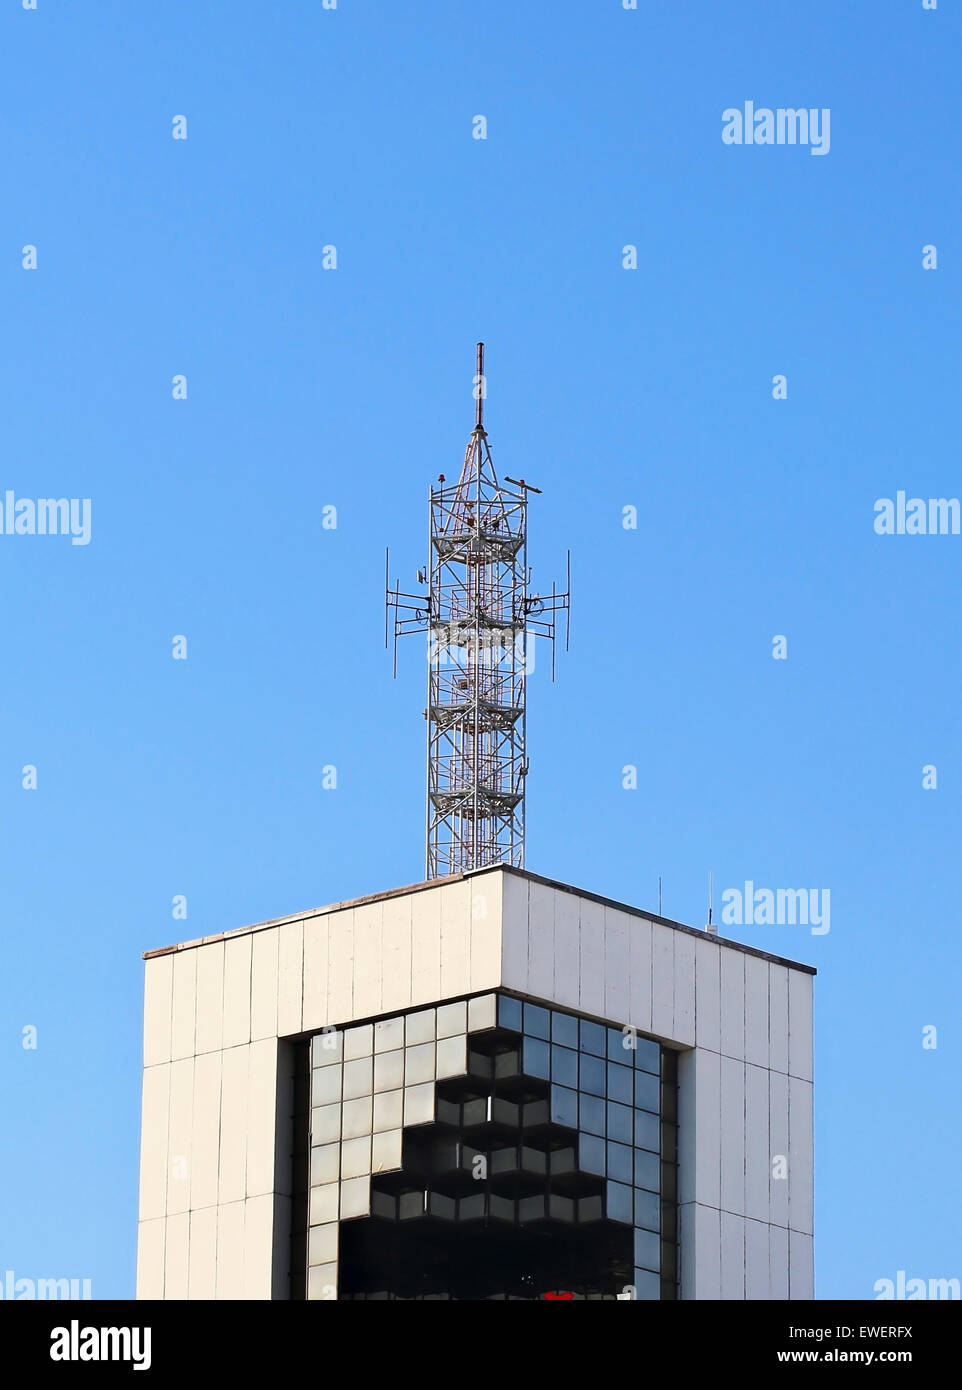 Metallic antenna on the roof of the high tech building Stock Photo